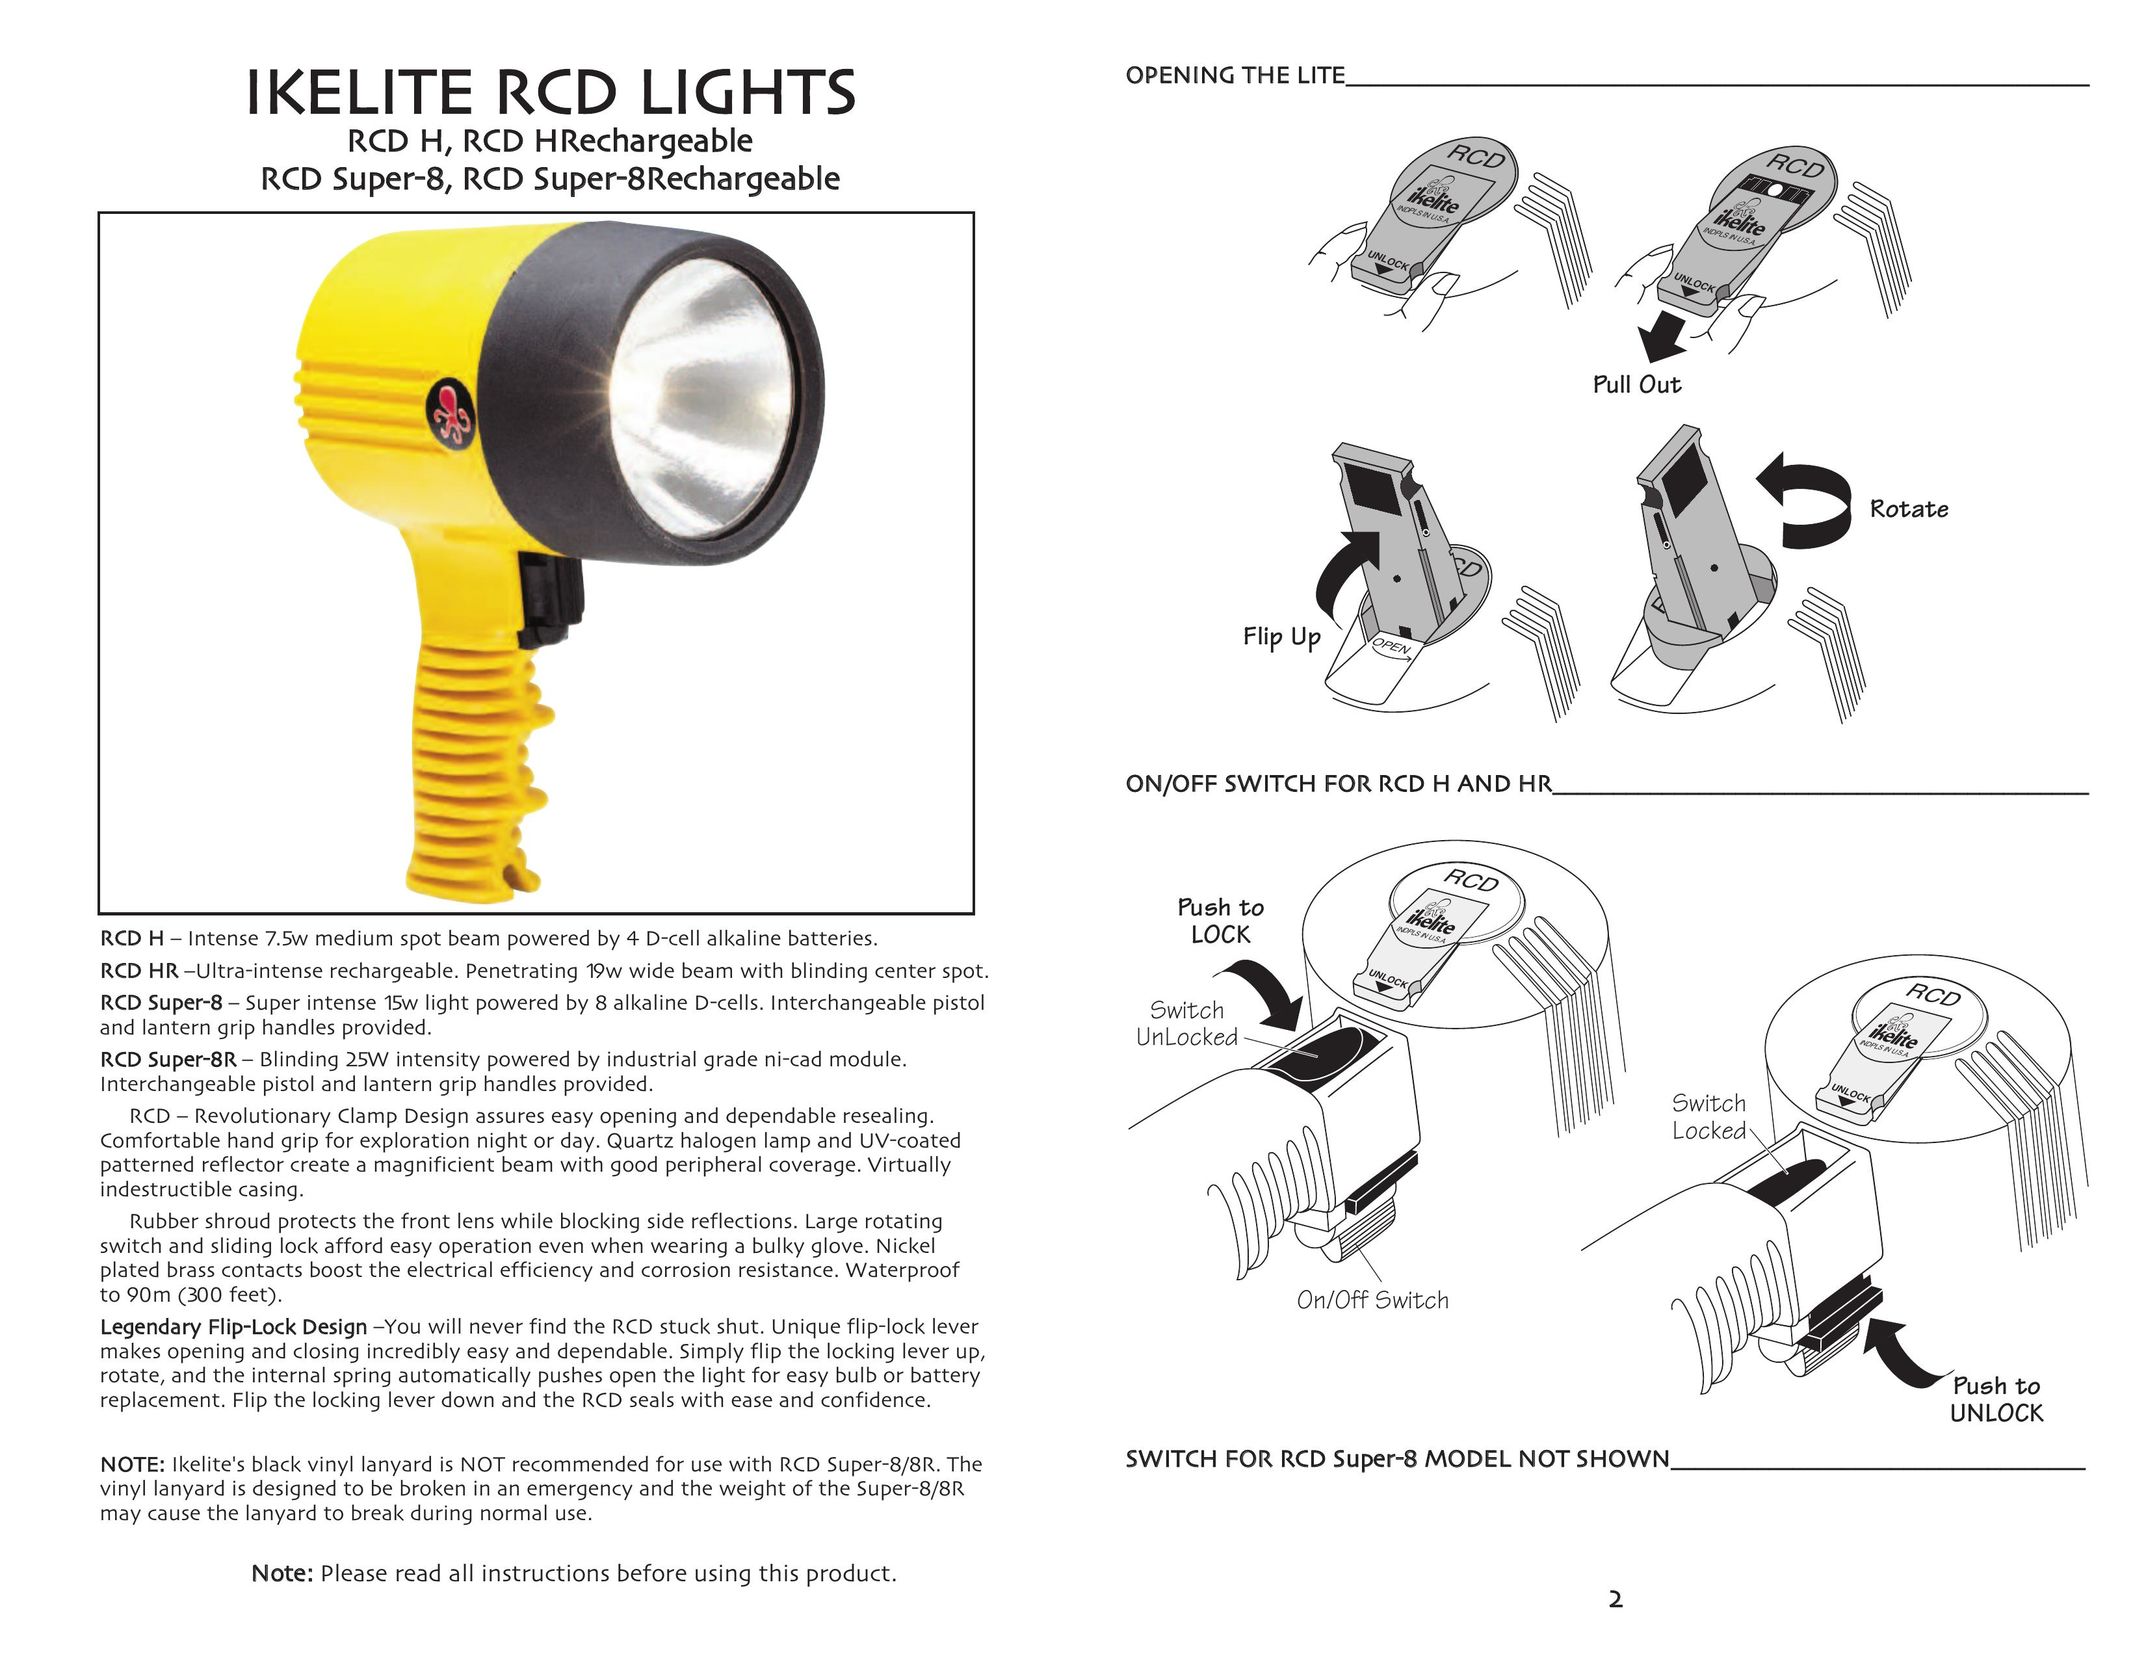 Ikelite RCD H Home Safety Product User Manual